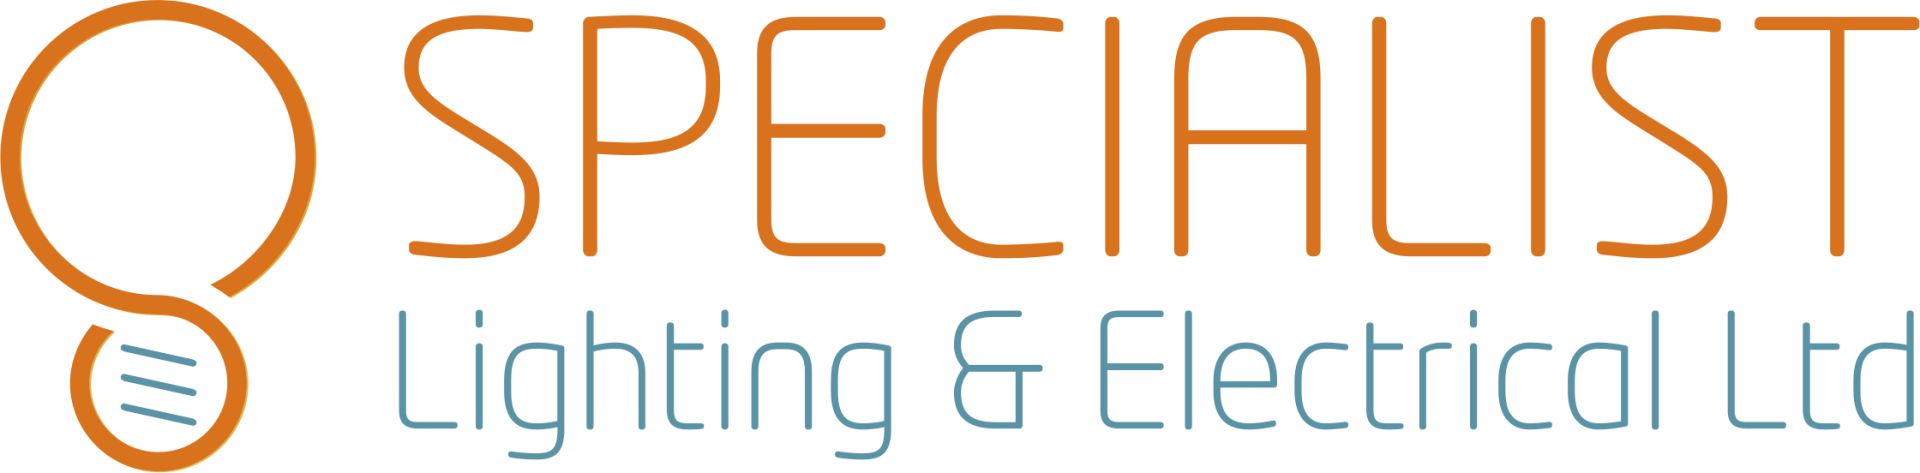 Specialist Lighting and Electrical Ltd logo